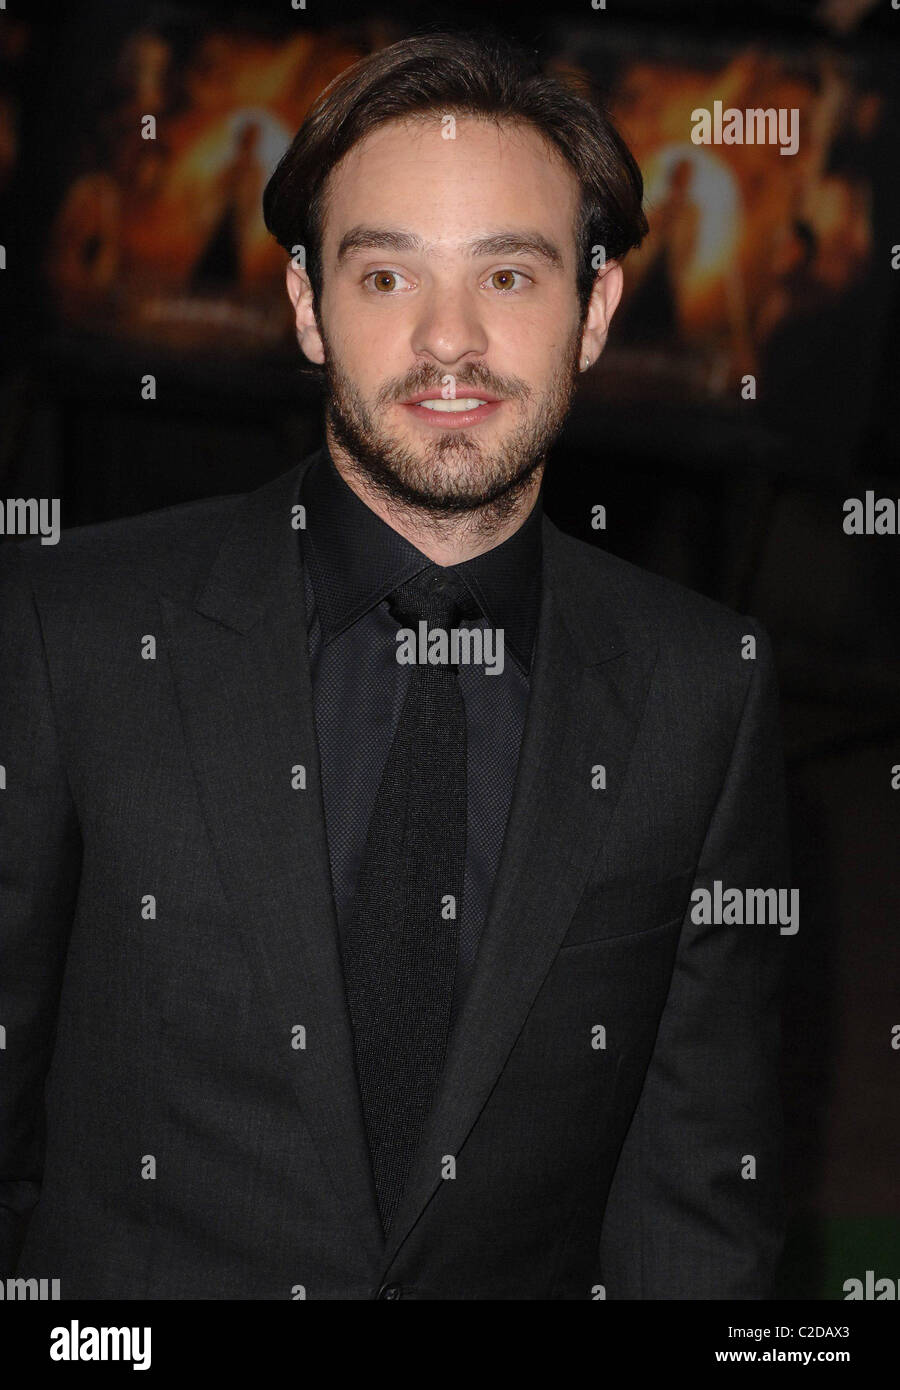 Charlie Cox UK film premiere of 'Stardust' held at the Odeon in Leicester Square London, England - 03.10.07 : Stock Photo